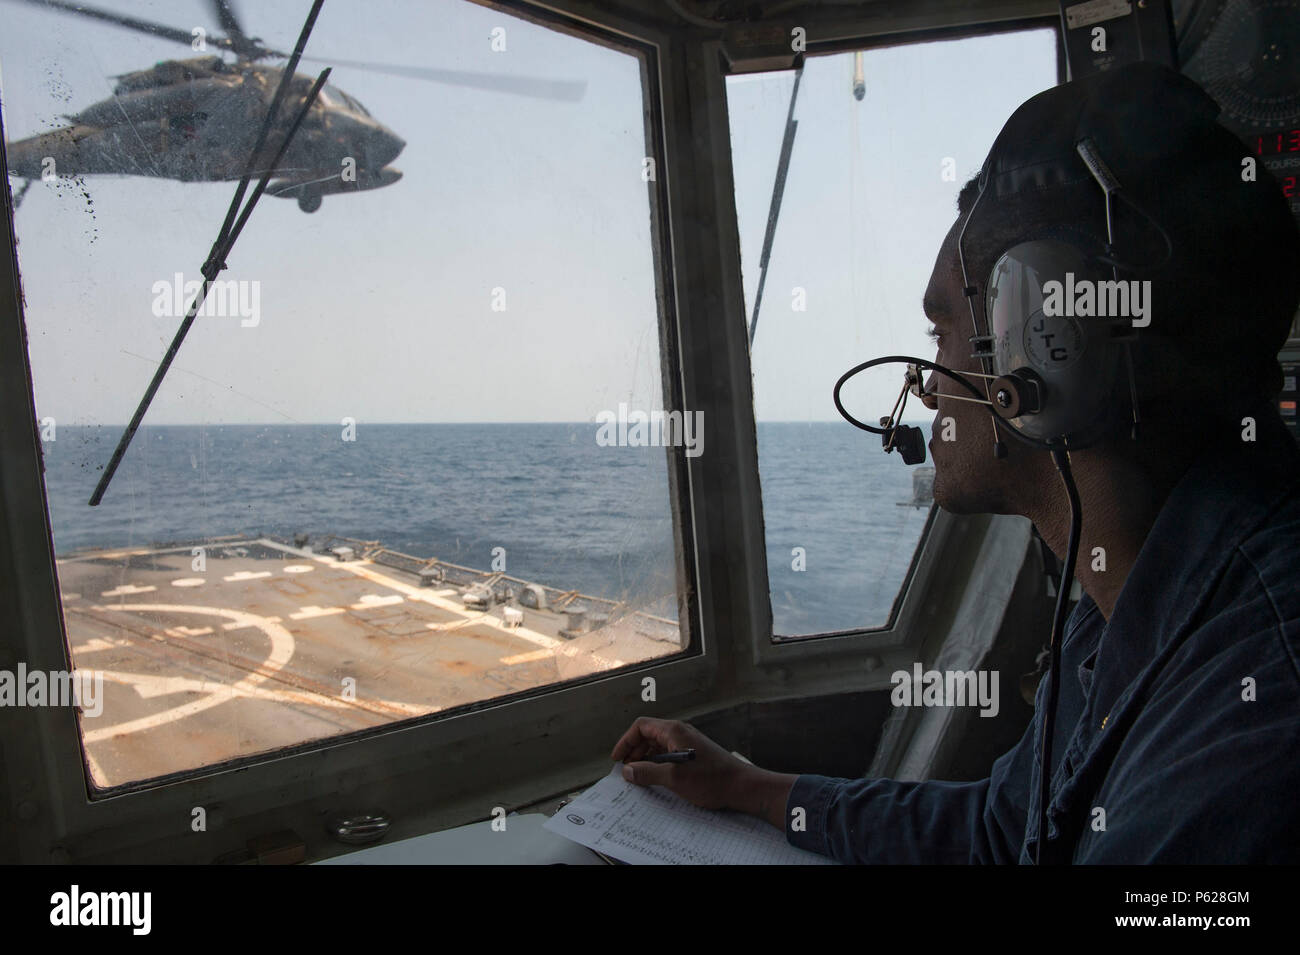 160414-N-MD297-161 PACIFIC OCEAN (April 14, 2016) Lt. j.g. Adam Johnson watches an Army UH-60 Blackhawk helicopter from the 1st Battalion, 228th Aviation Regiment take off from the flight aboard the Arleigh Burke-class guided-missile destroyer USS Lassen (DDG 82) while conducting deck landing qualifications (DLQs). Lassen is currently underway in support of Operation Martillo, a joint operation with the U.S. Coast Guard and partner nations within the 4th Fleet area of responsibility. Operation Martillo is being led by Joint Interagency Task Force South, in support of U.S. Southern Command. (U. Stock Photo